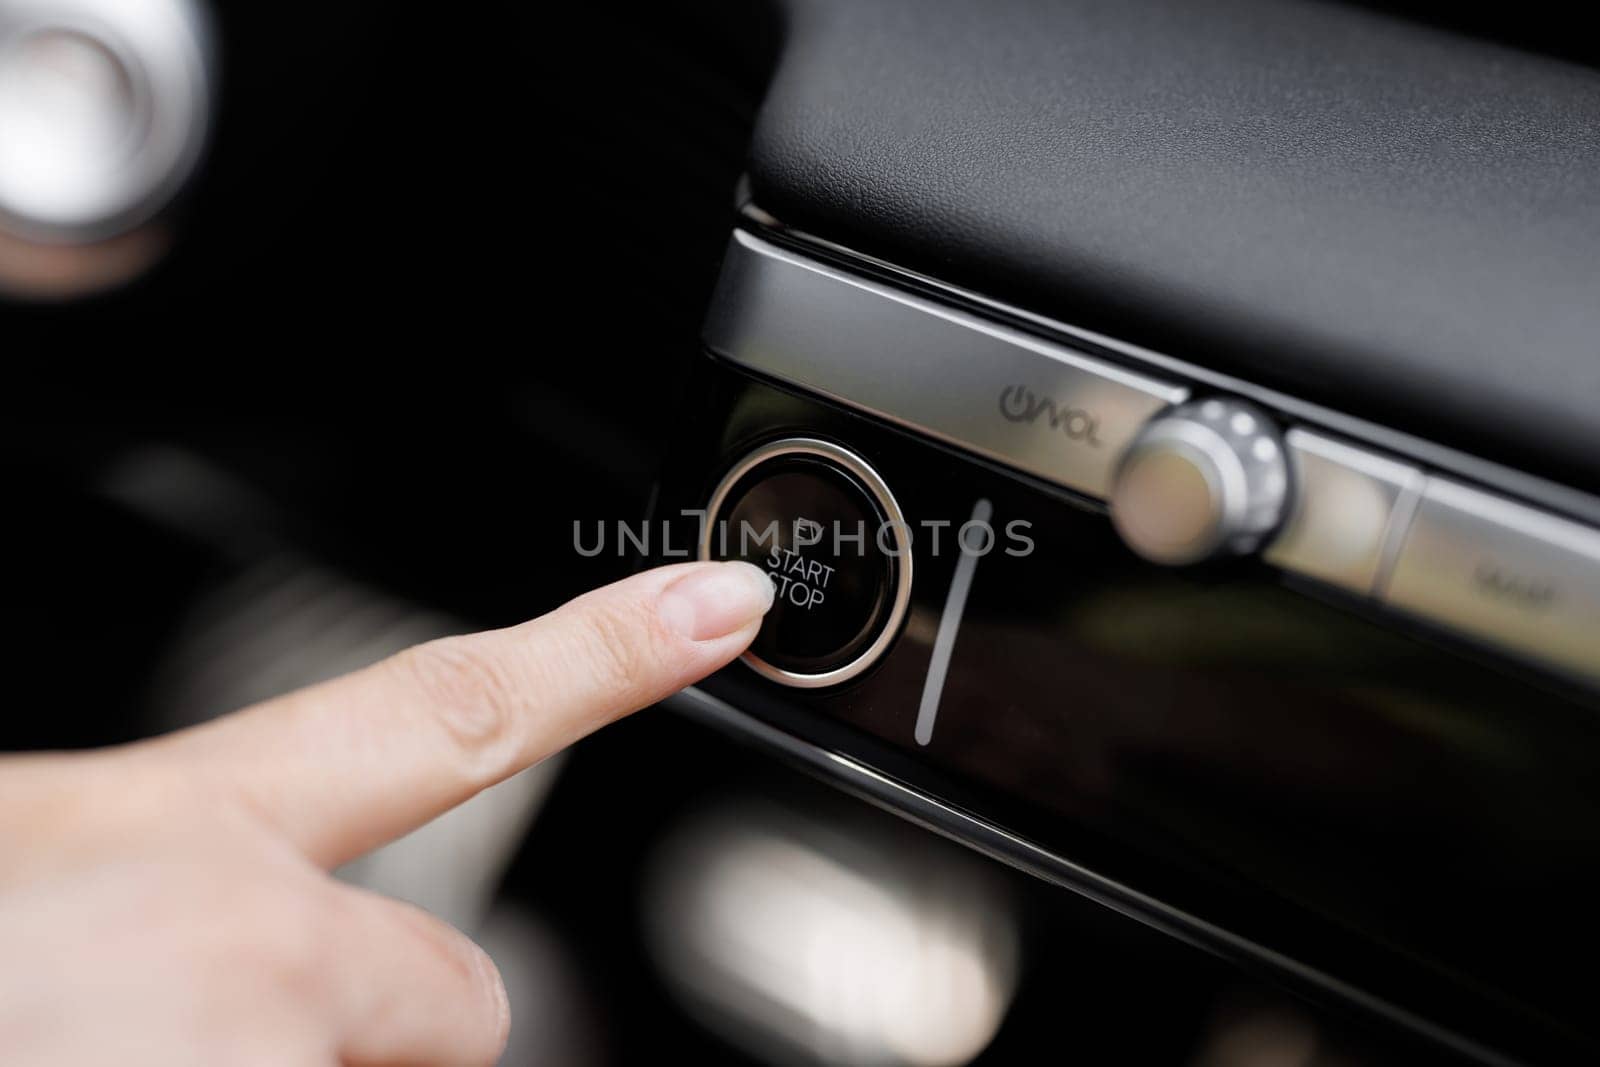 Pressing Stand By Power Button To Turn On and Off the Electric Car Close-Up. Push start stop button of ev car. Finger press the button to start the car engine. Concept of transportation and technology by uflypro